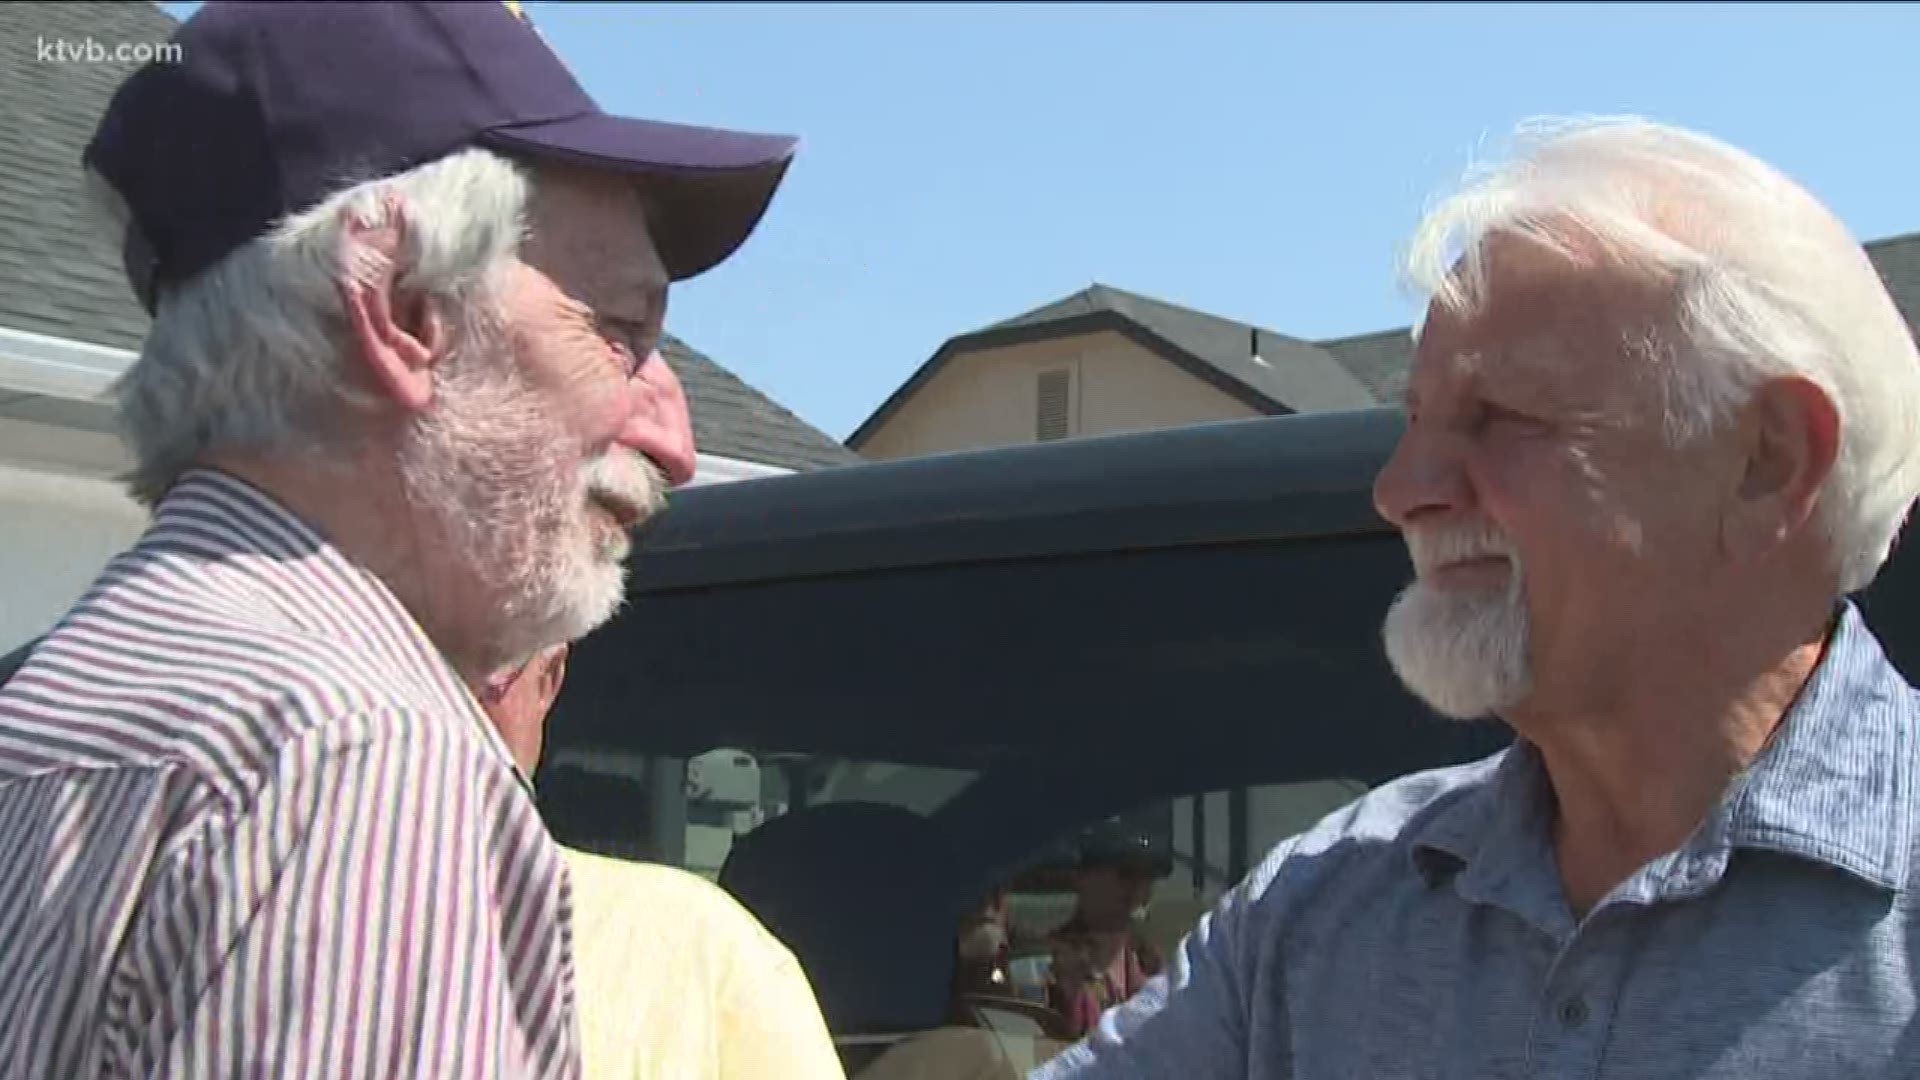 53 years after thinking one of their comrades died in Vietnam, three veterans reunited in a surprise birthday party in Caldwell. The moment, five decades in the making, was something Ivis Sloane and Jim Mattis never thought would happen.